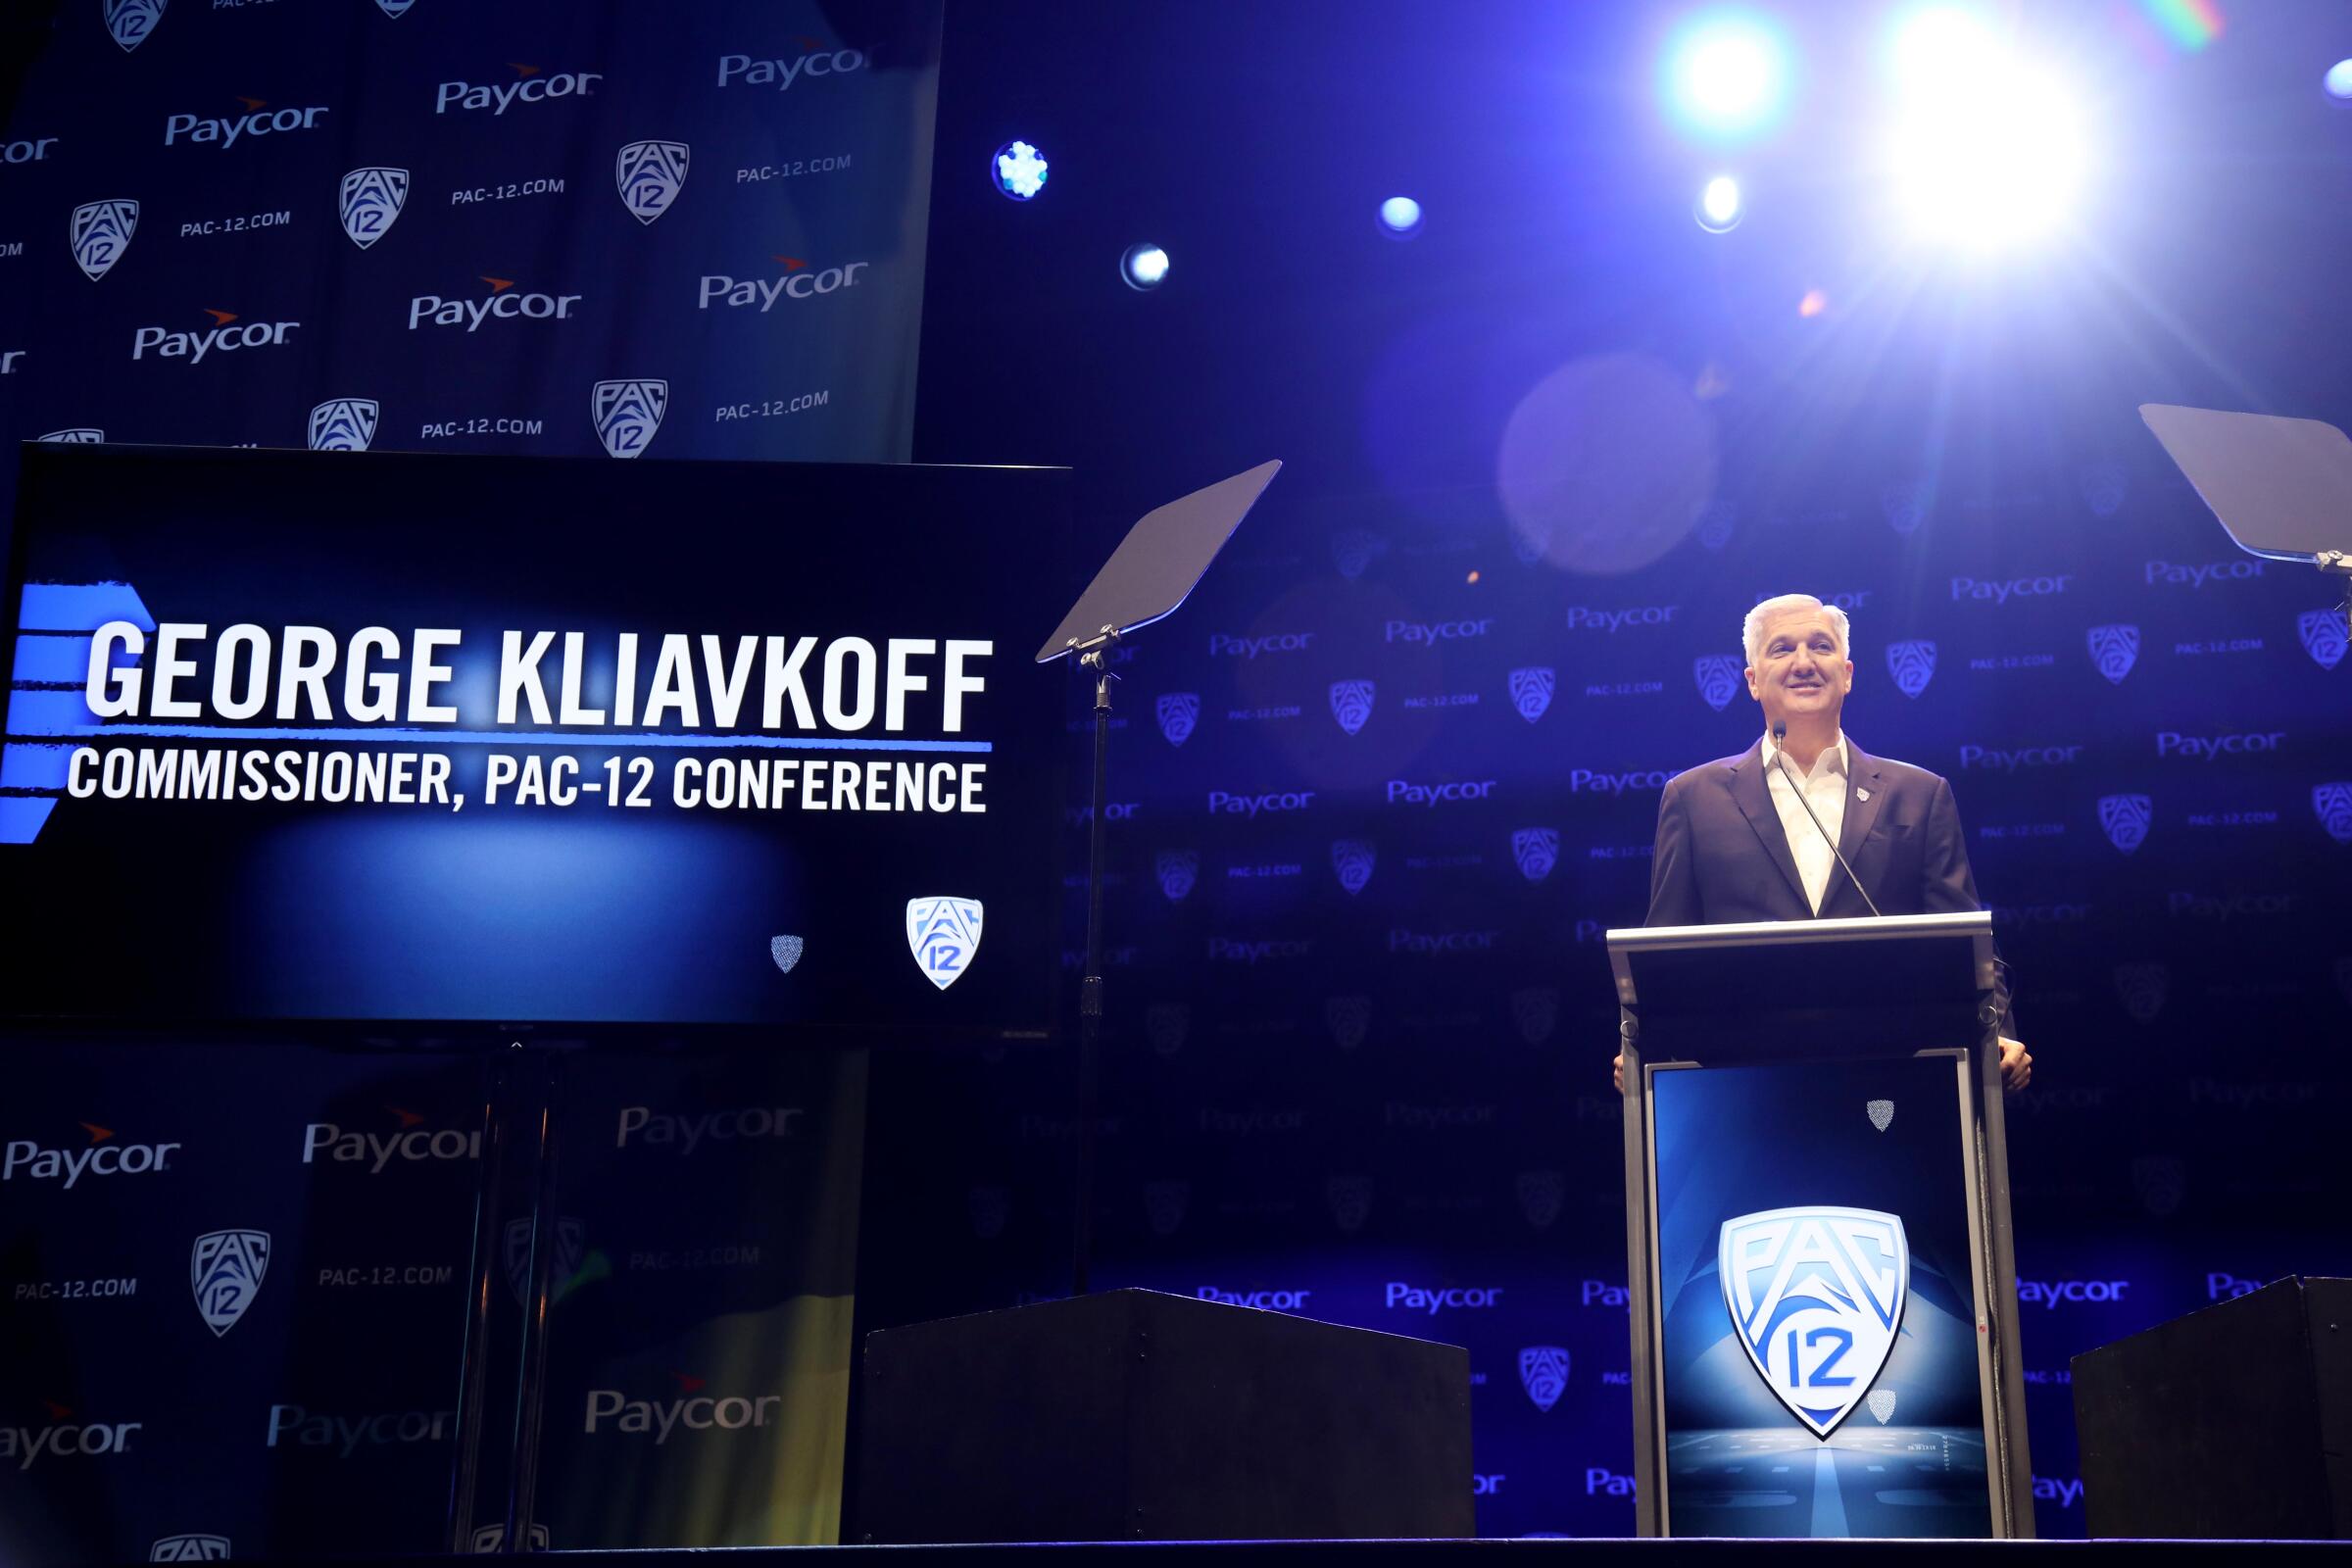 LOS ANGELES, CA - JULY 29, 2022 - - Pac-12 Commissioner George Kliavkoff makes his opening remarks at the start of the Pac-12 Media Day at The Novo at L.A. LIVE on July 29, 2022. The one-day event features all 12 head coaches and two student-athletes from each university, as well as representatives from the Pac-12 Conference staff. (Genaro Molina / Los Angeles Times)